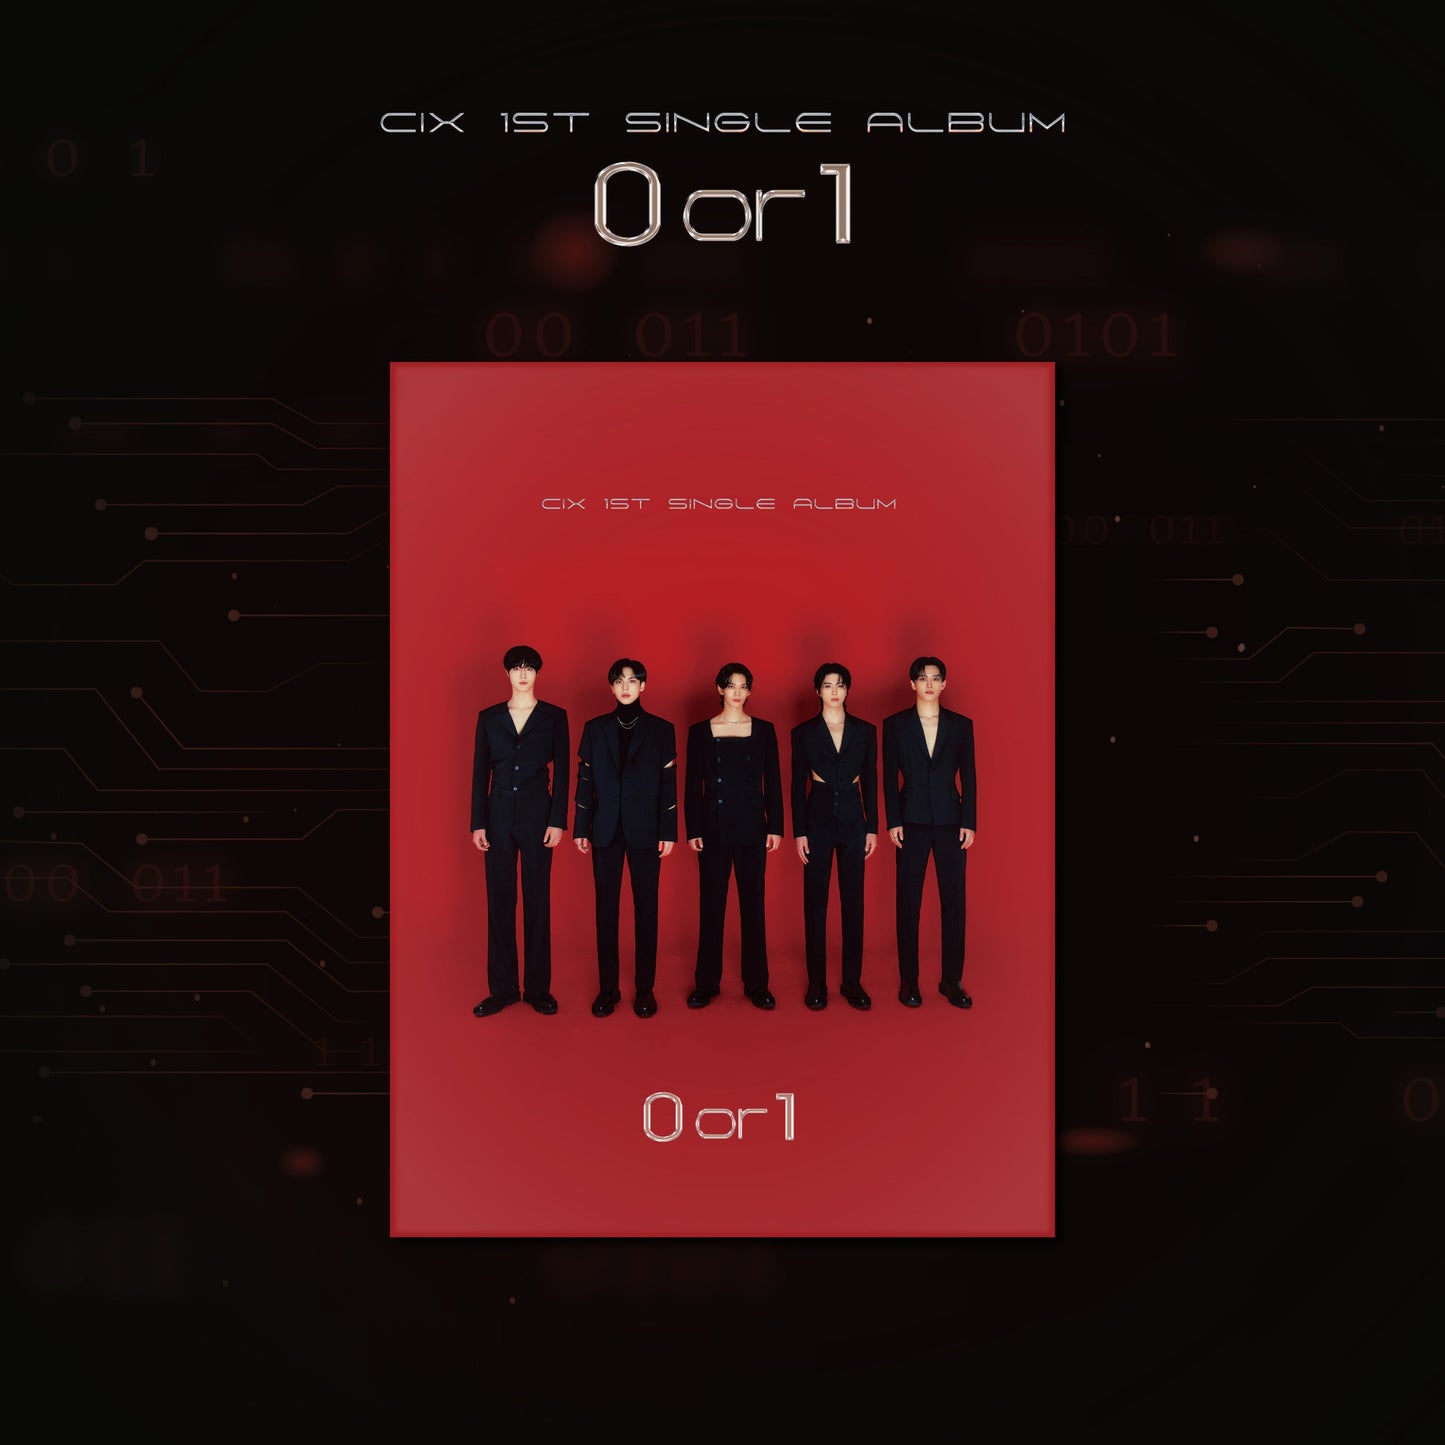 CIX 1ST SINGLE ALBUM '0 OR 1' ANDROID VERSION COVER